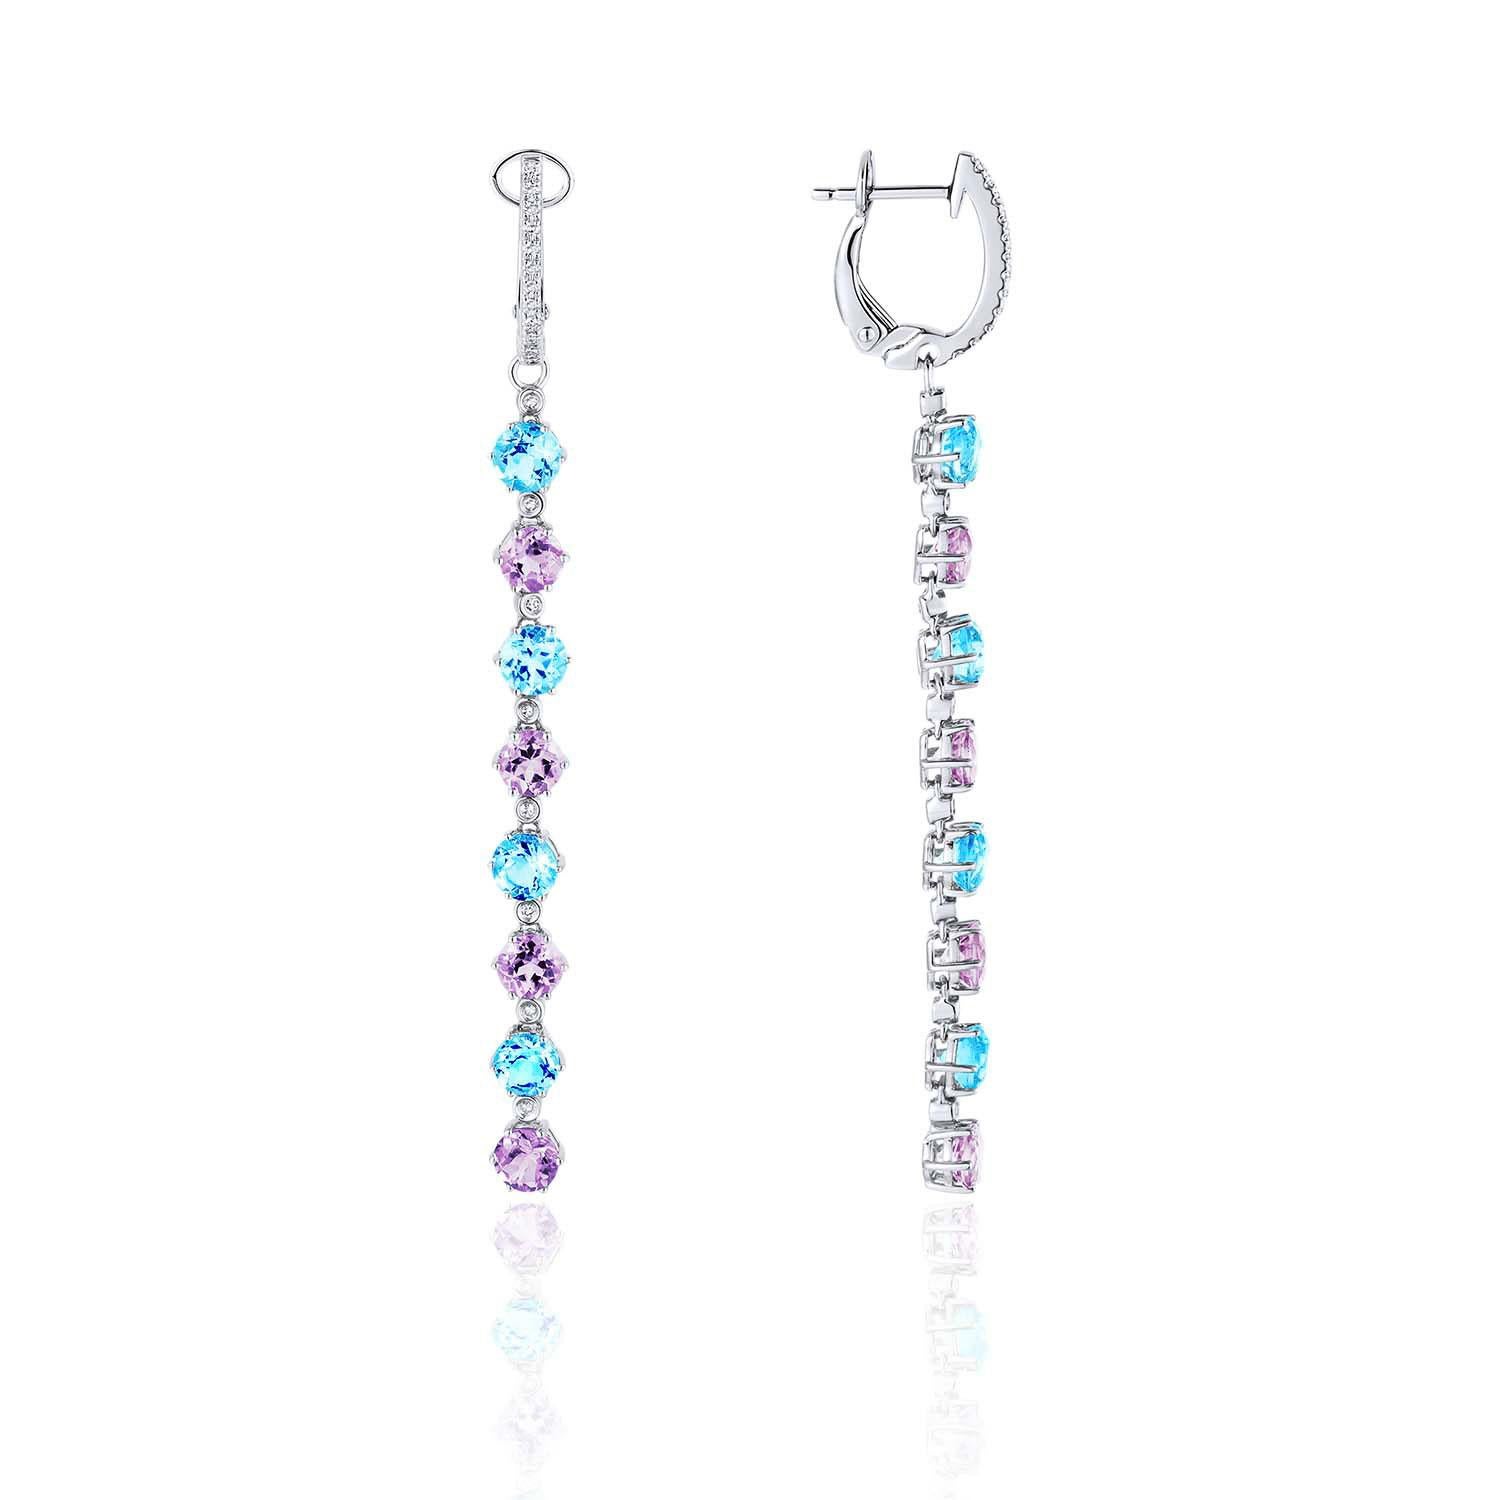 14K White Gold Diamond, Blue Topaz Earrings and Amethyst Earrings featuring 0.13 Carats of Diamonds and 2.46 Carats of Amethyst, 2.26 Carats of Blue Topaz

Underline your look with this sharp 14K White gold shape Diamond Earrings. High quality